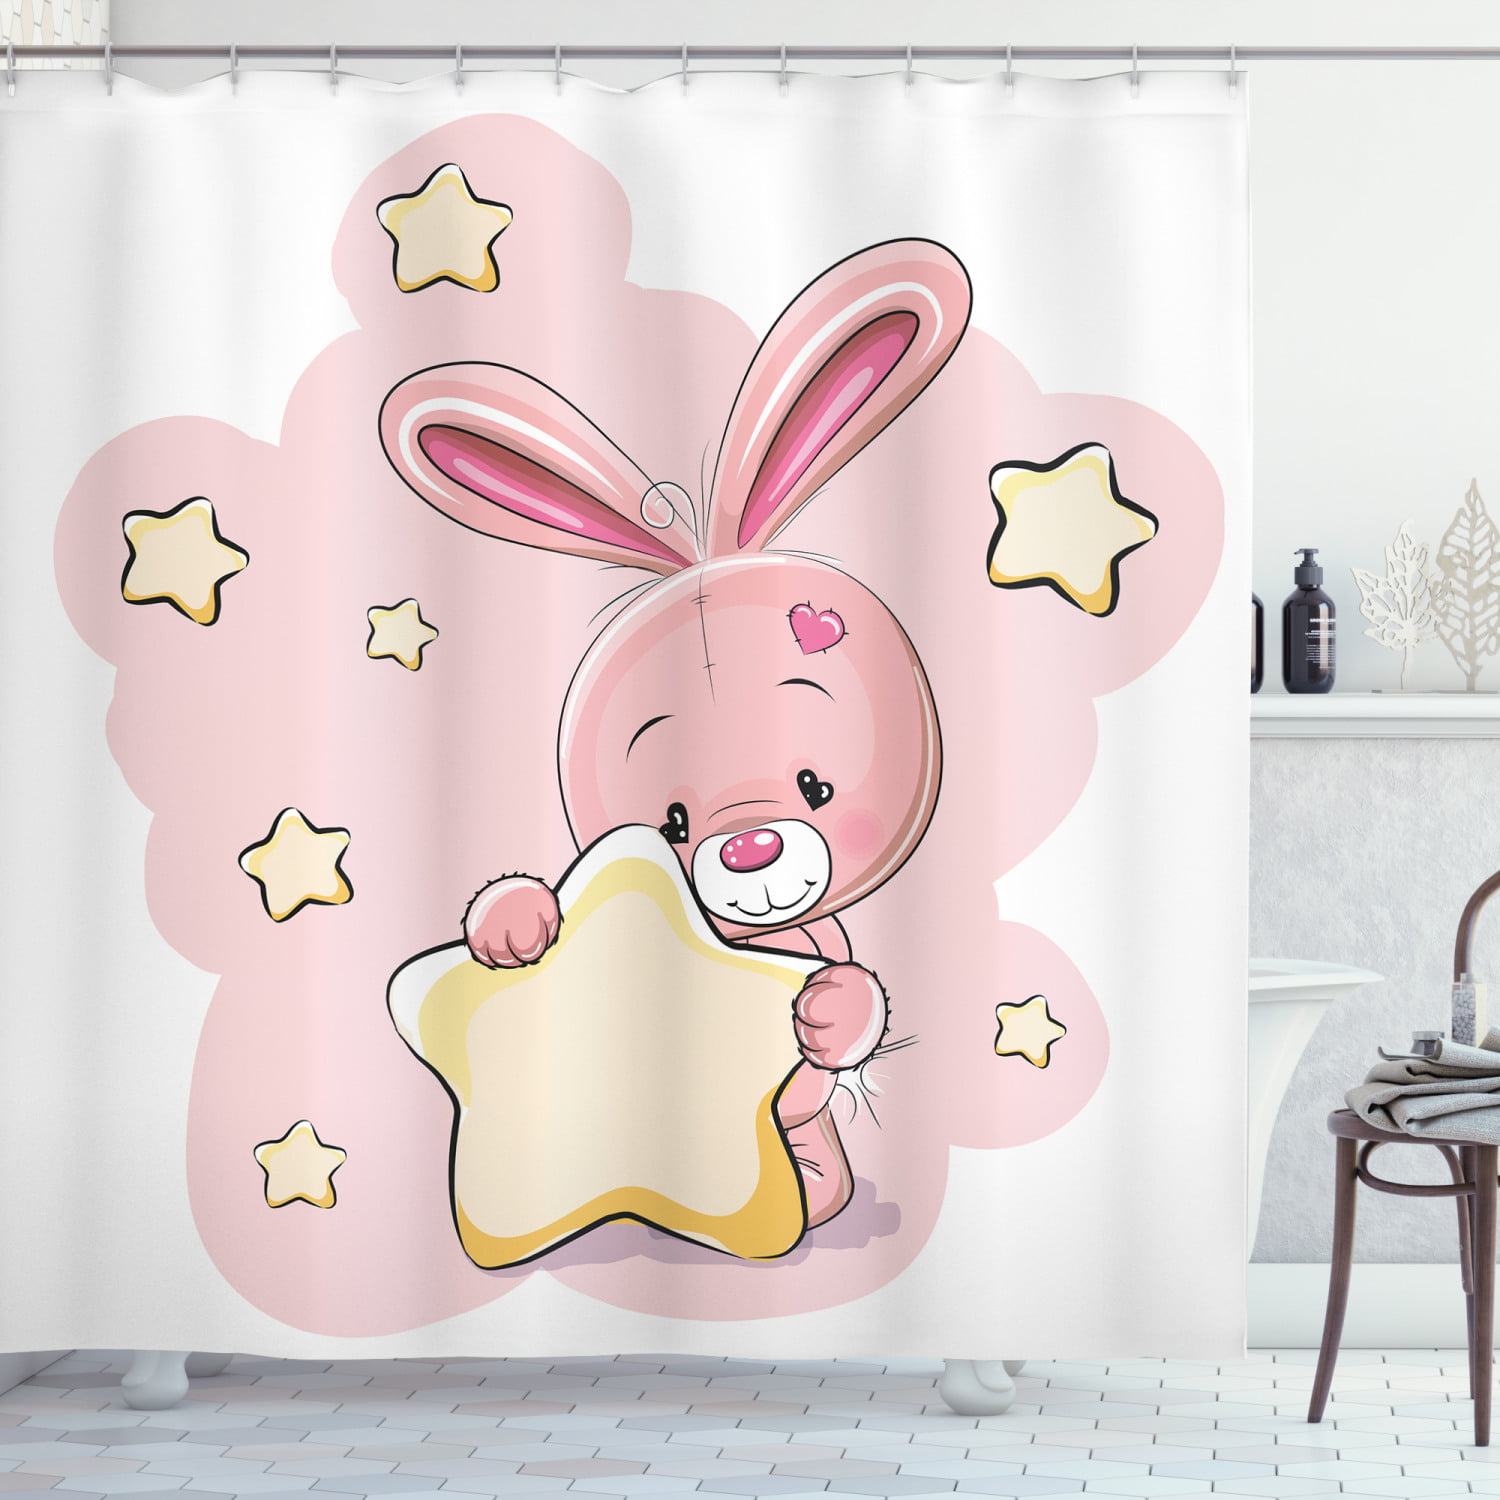 Funny Rabbit Man Shower Curtain Liner Polyester Fabric Bathroom Set Accessories 